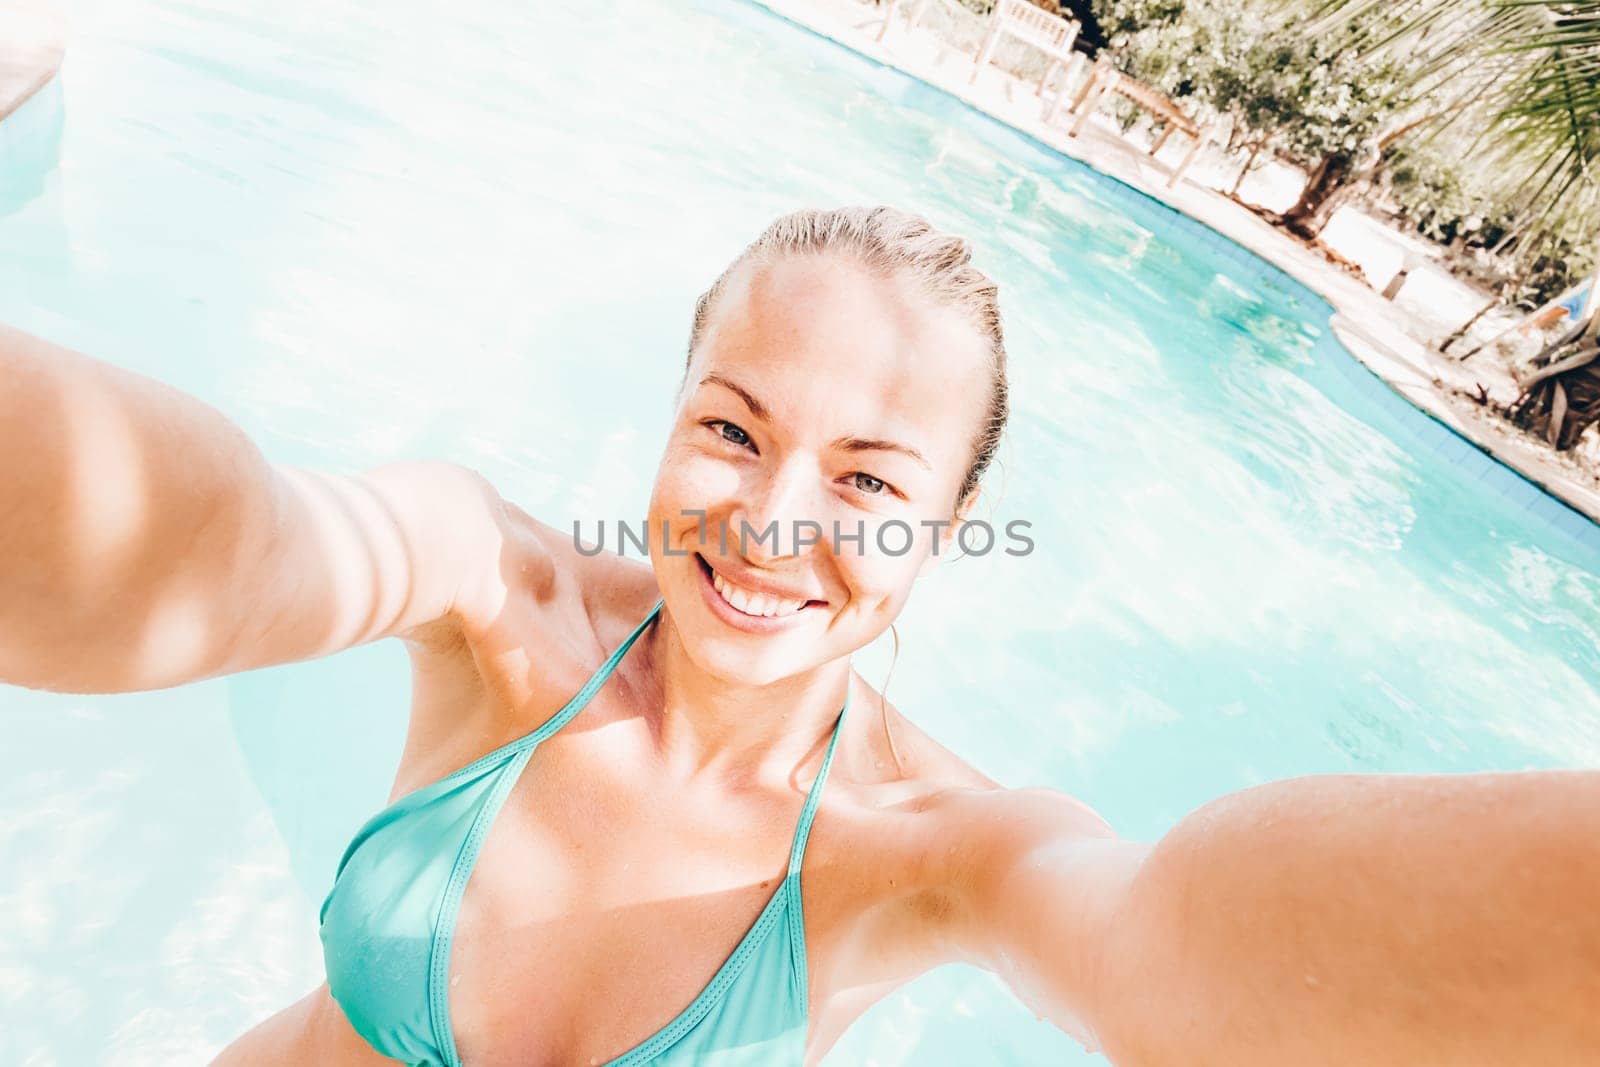 Lady taking a selfie at resorts poolside on summer vacations. Holidays and vacations.